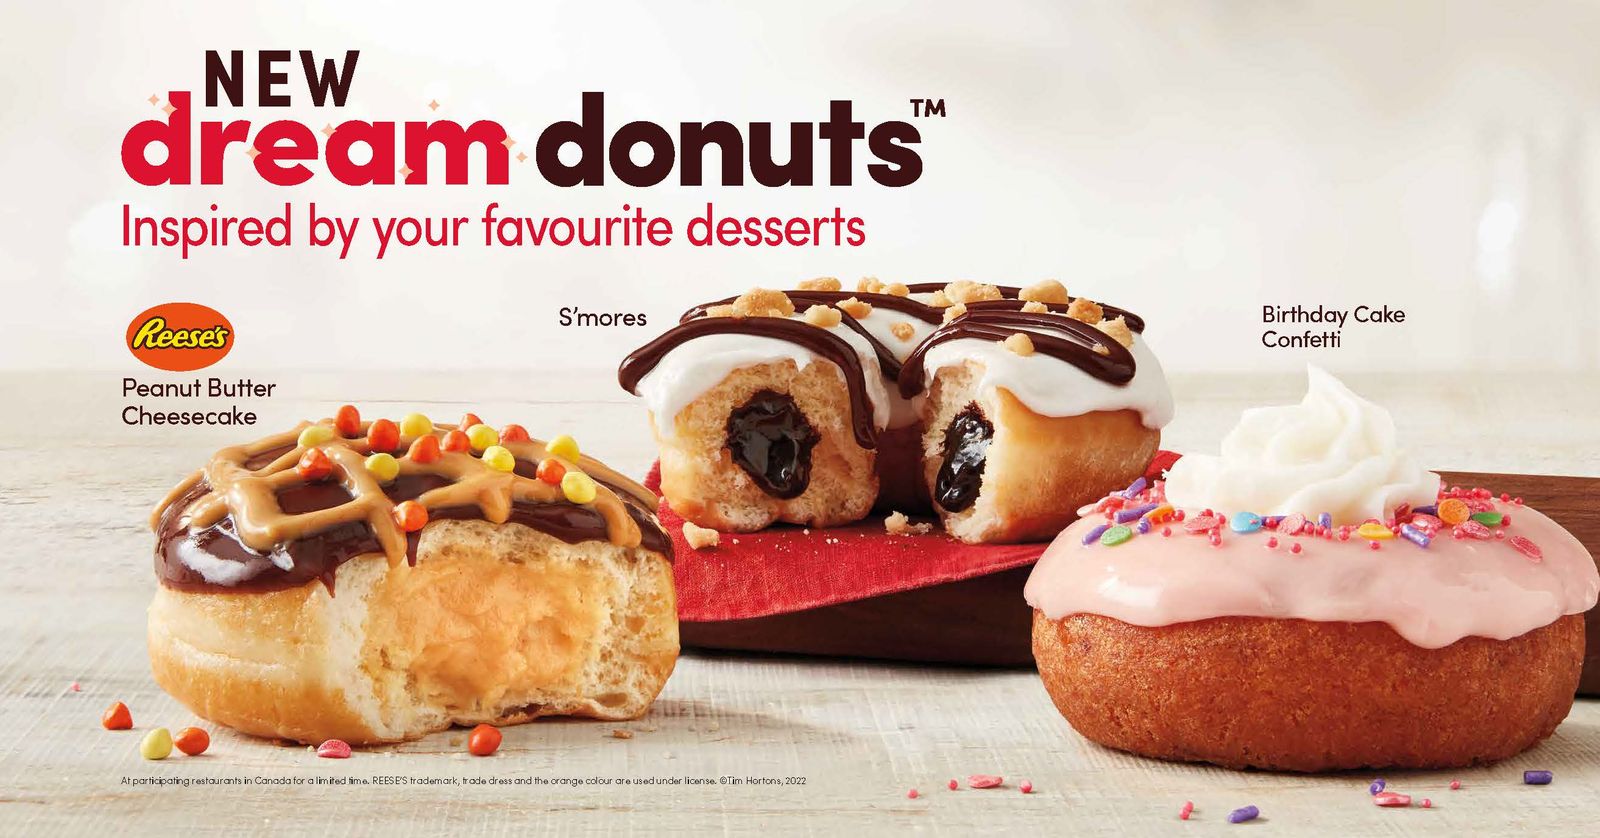 National Doughnut Day: Tim Hortons' giving out free ones today - Summerland  Review